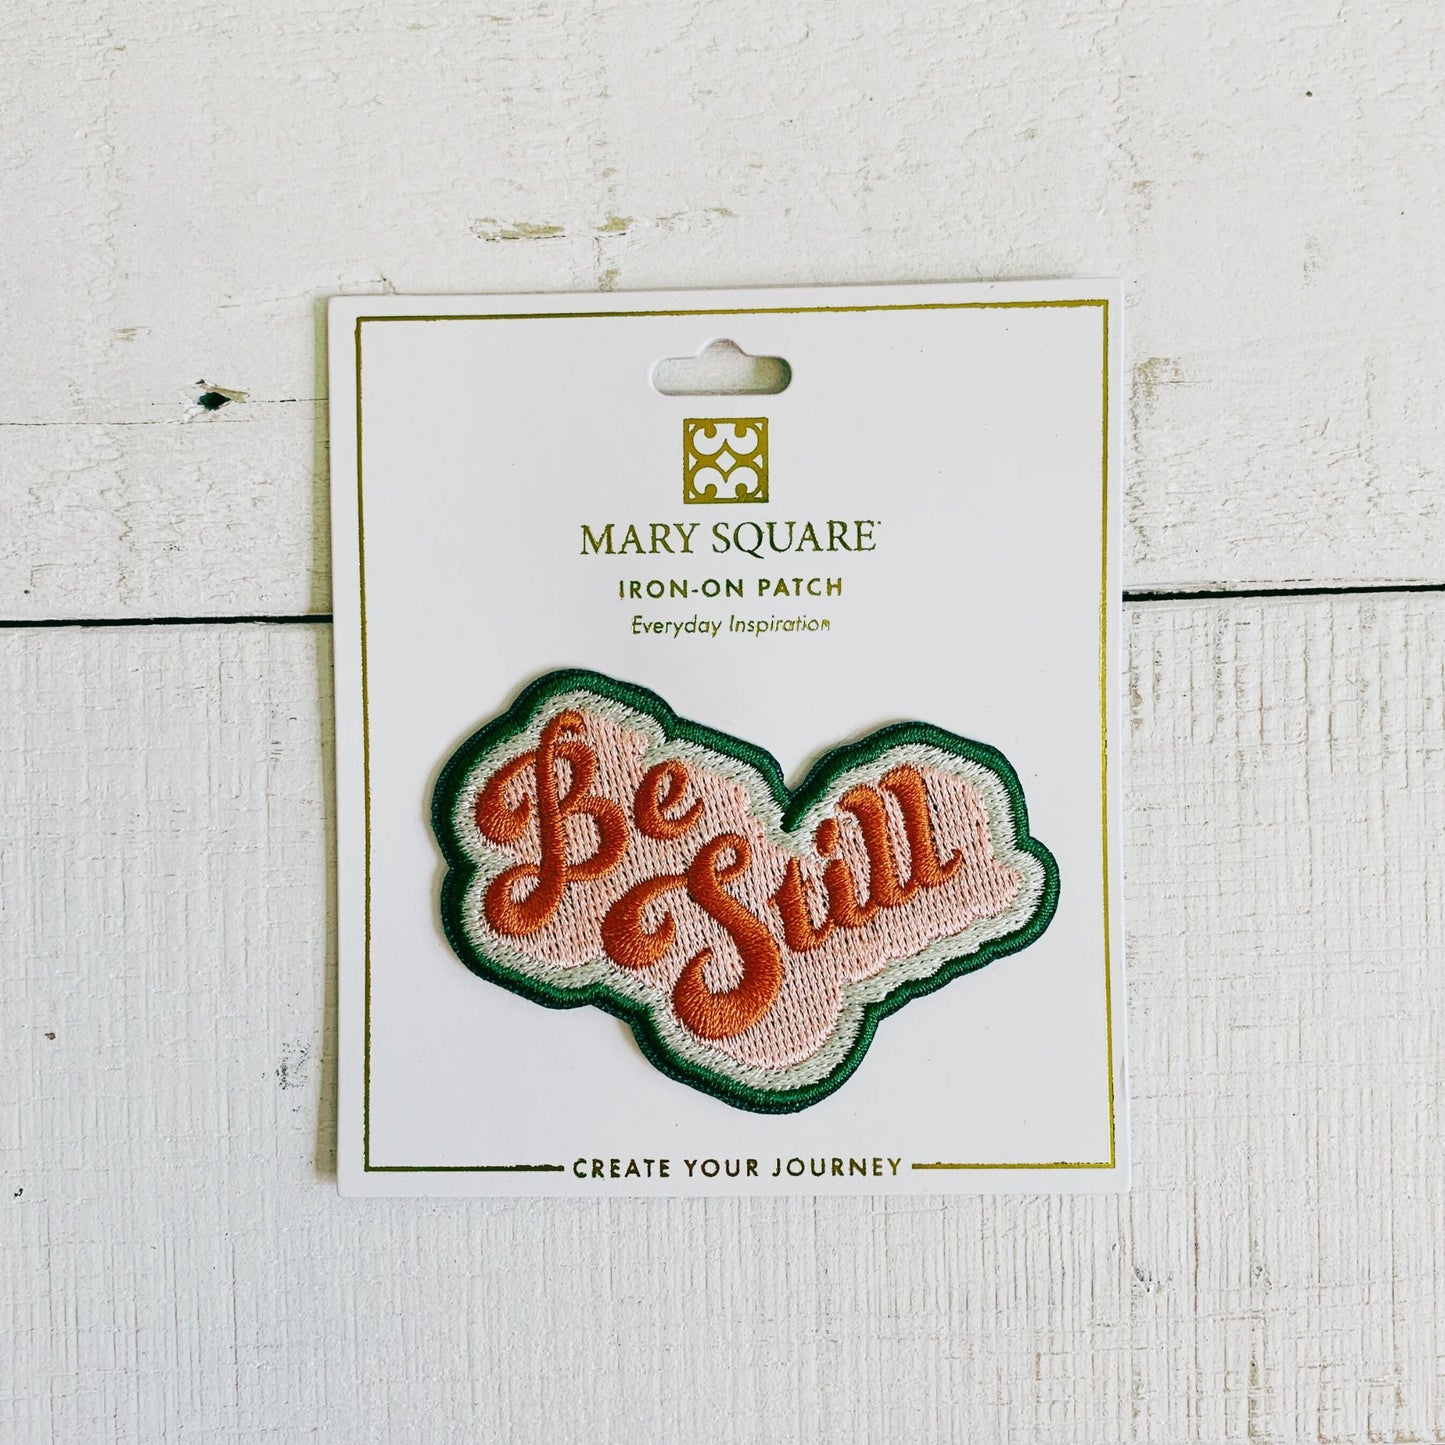 Be Still Iron-On Patch | Fabric Heat-transfer Embroidered Phrase Patch